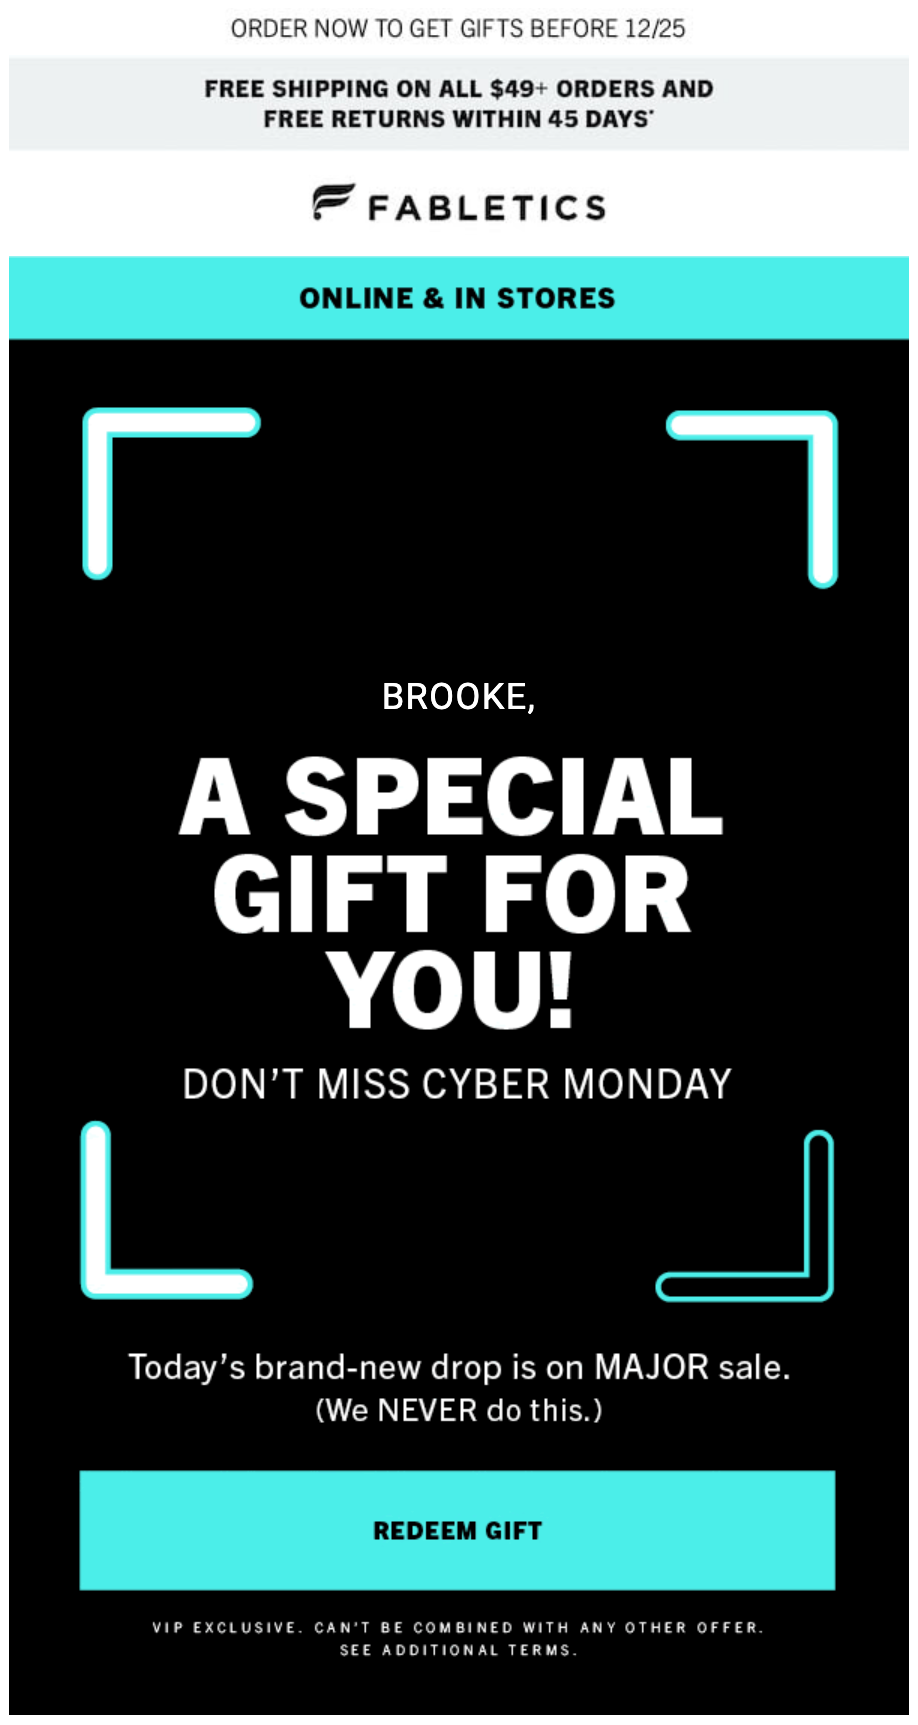 Fabletics' Cyber Monday Email with Customer Name